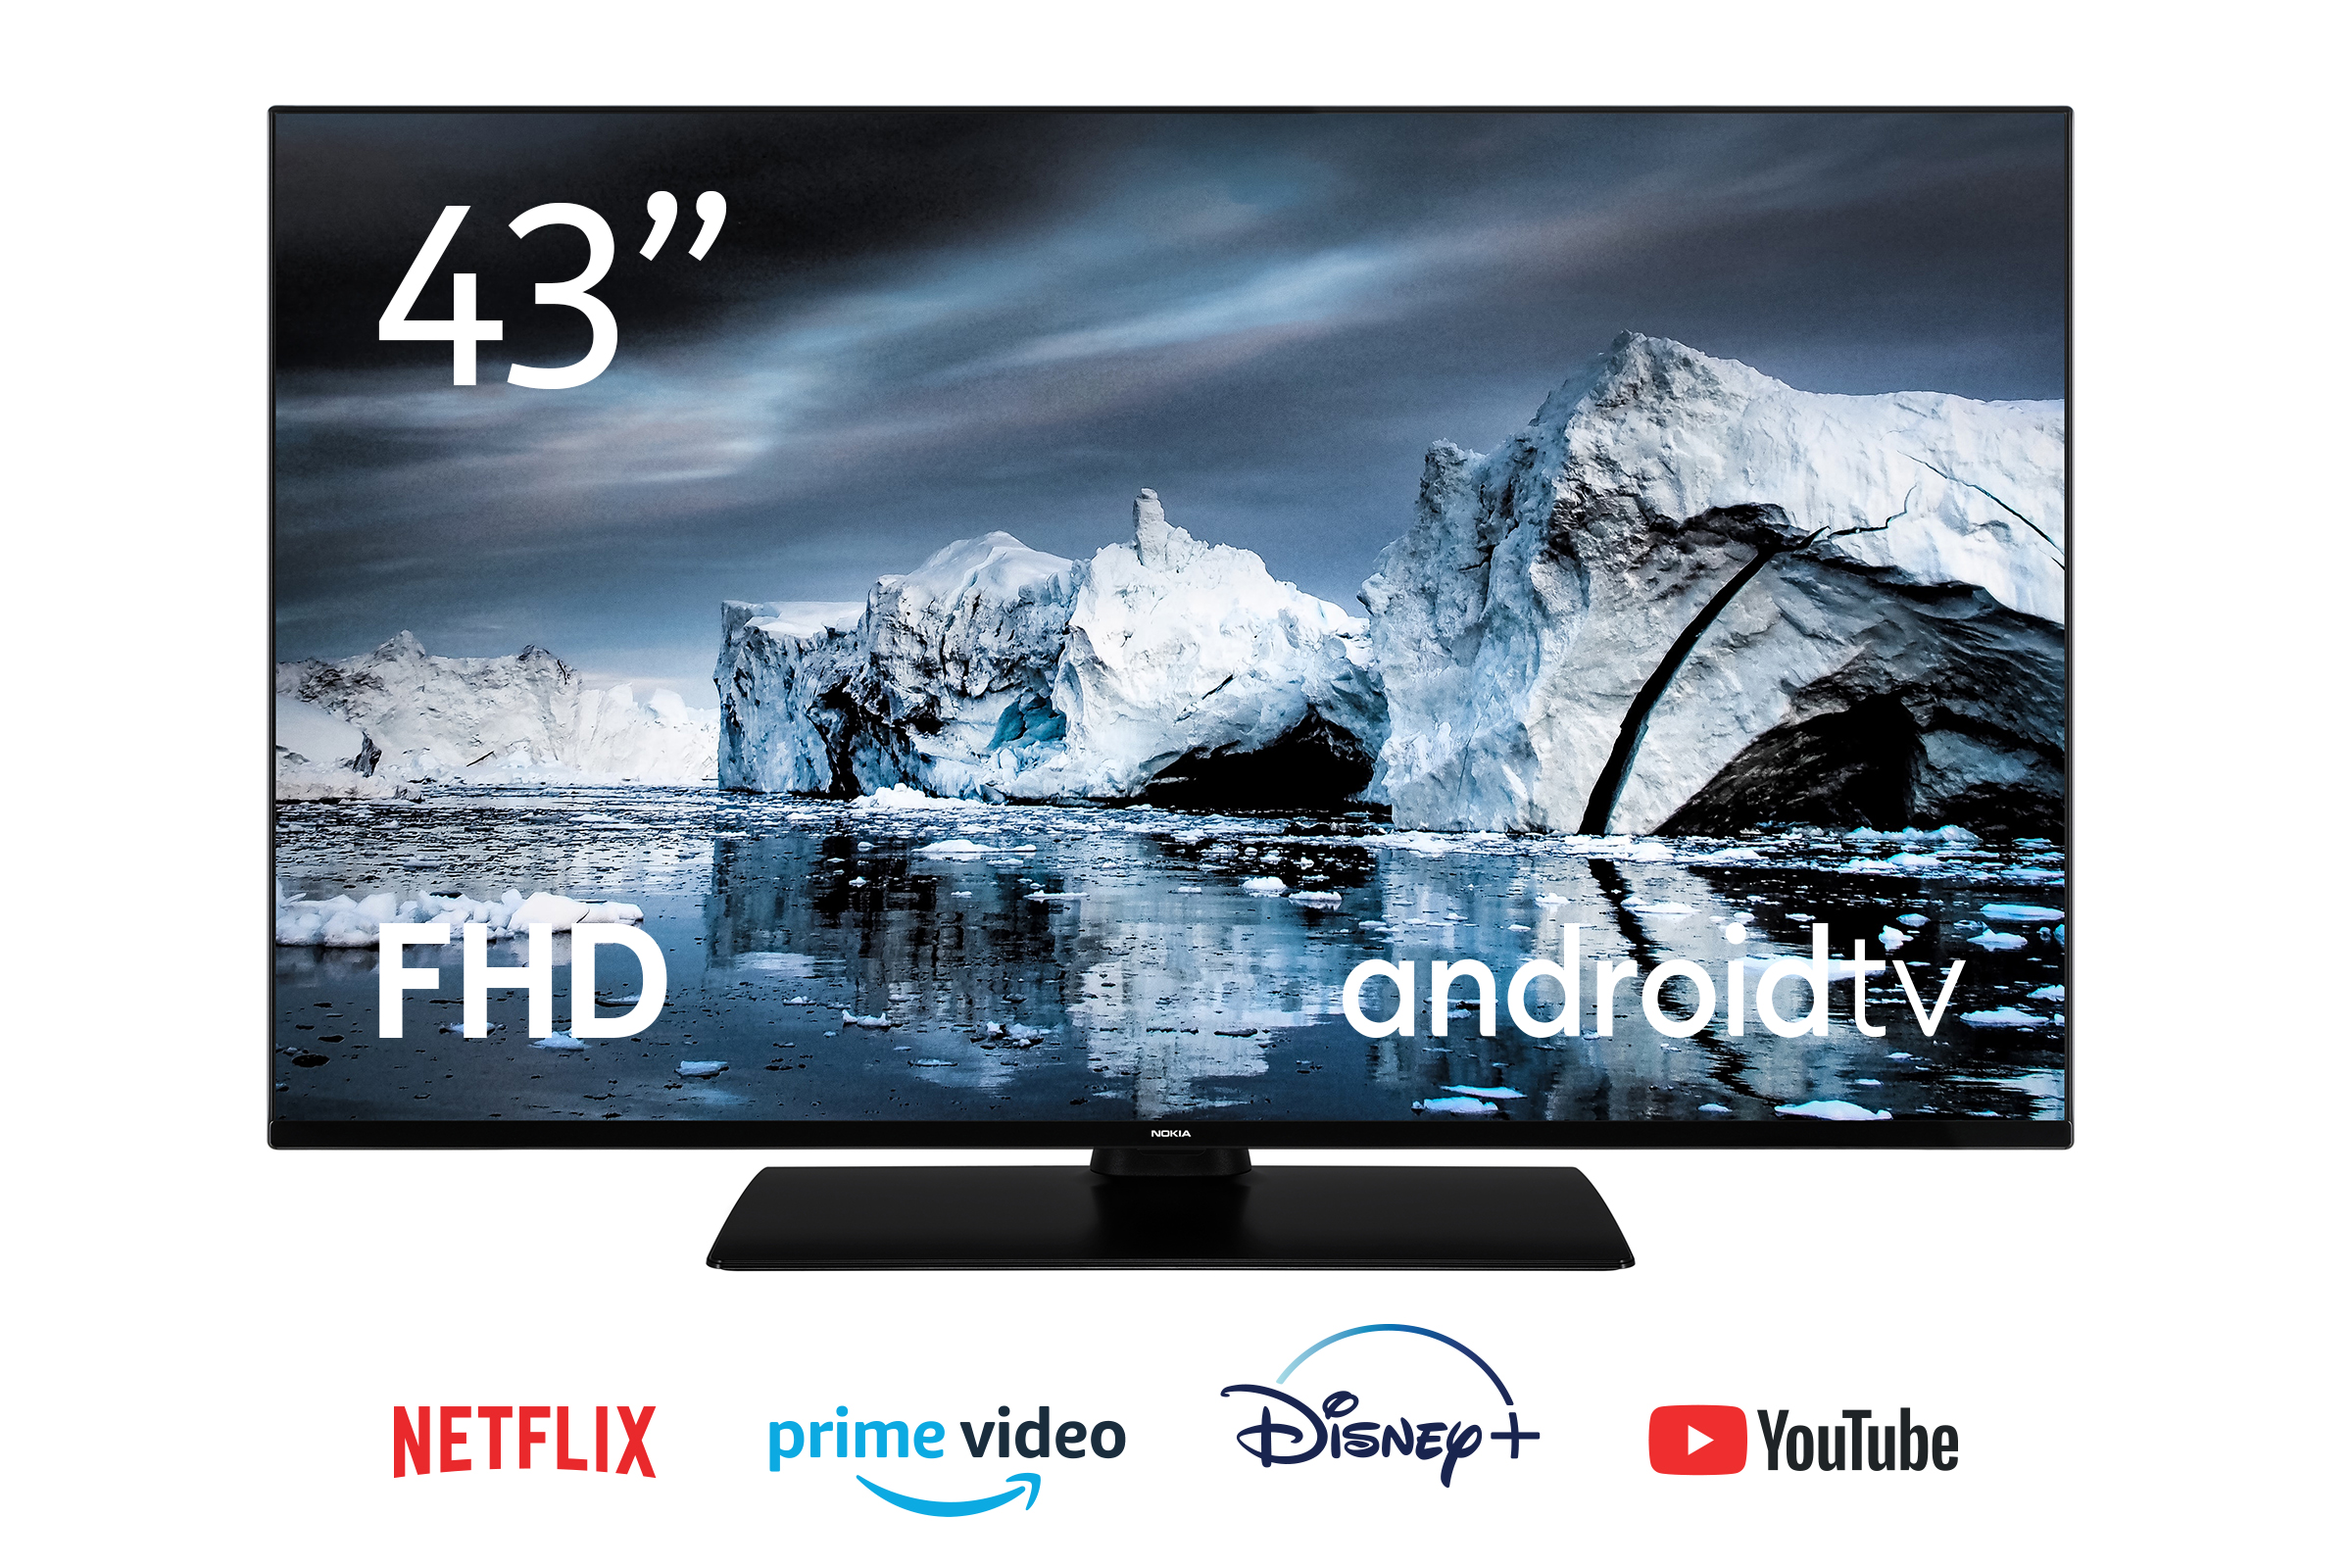 Nokia 43" FHD Smart TV on Android TV